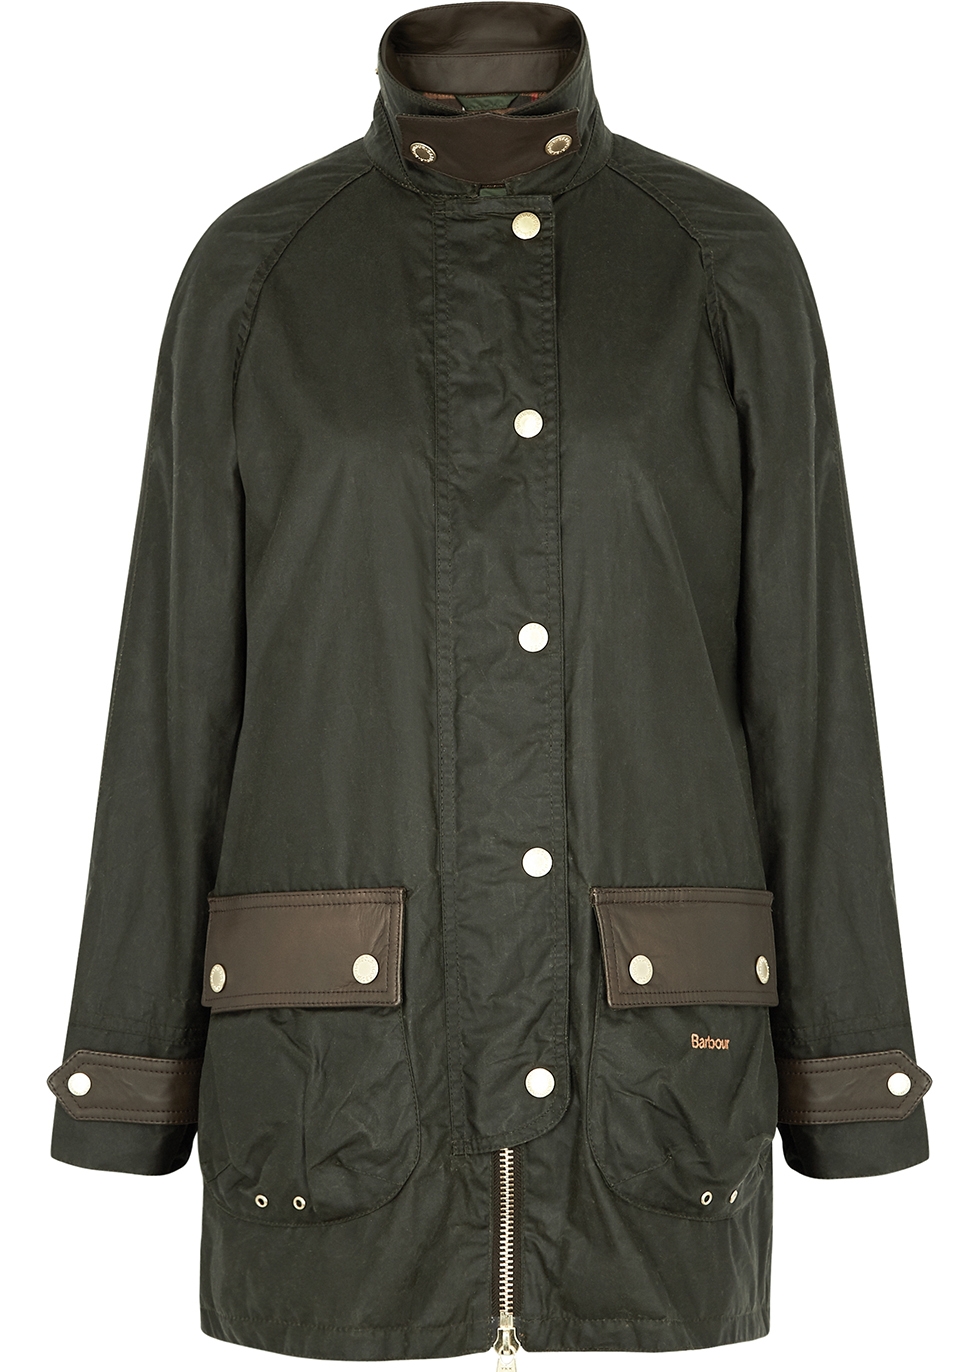 barbour jackets and coats